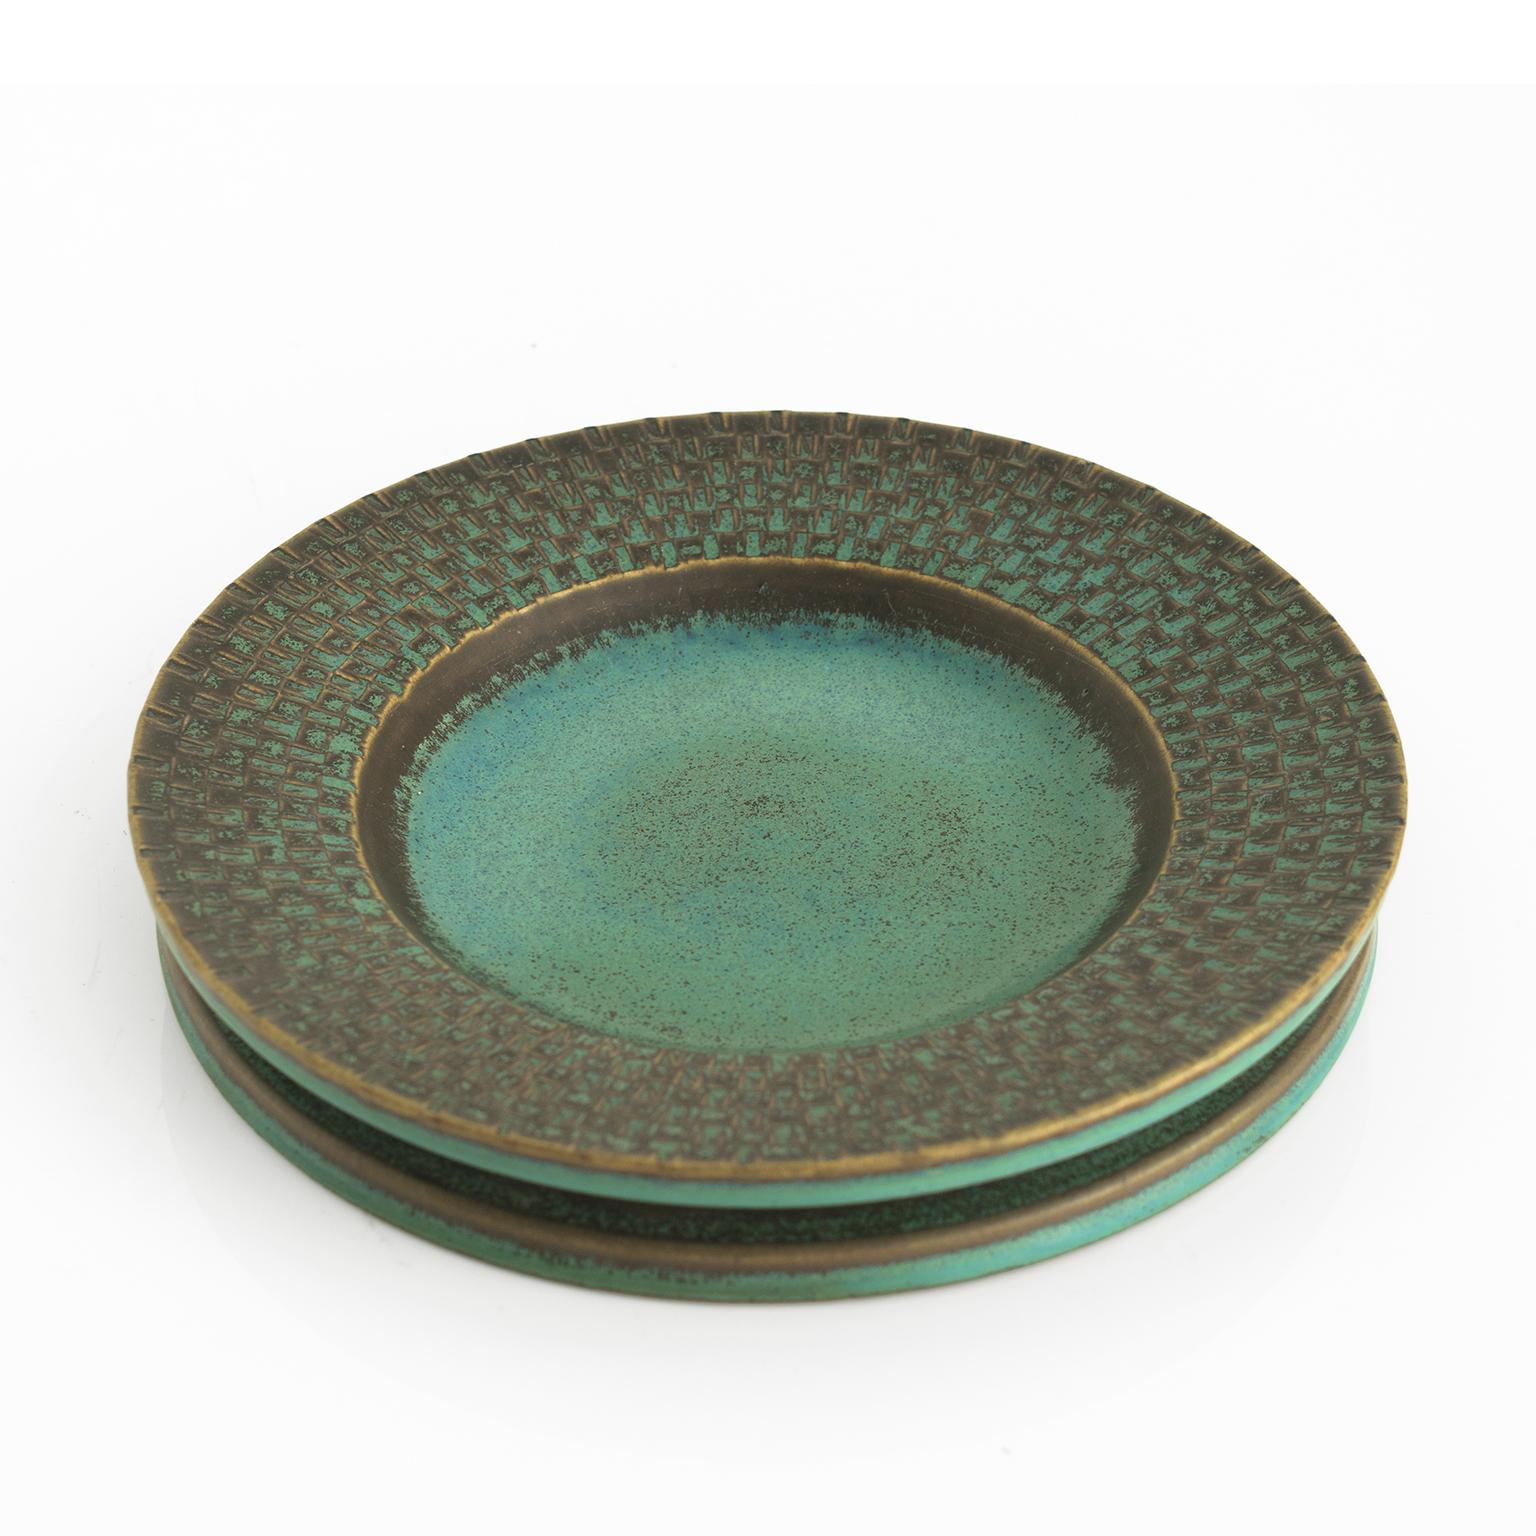 Stig Lindberg, Scandinavian Modern hand thrown dish with with a highly textured surface rim in a beautiful green glaze. Made at Gustavsberg, Sweden, circa 1970. Sighed on bottom.

Measures: Diameter: 7.75” Height: “2.